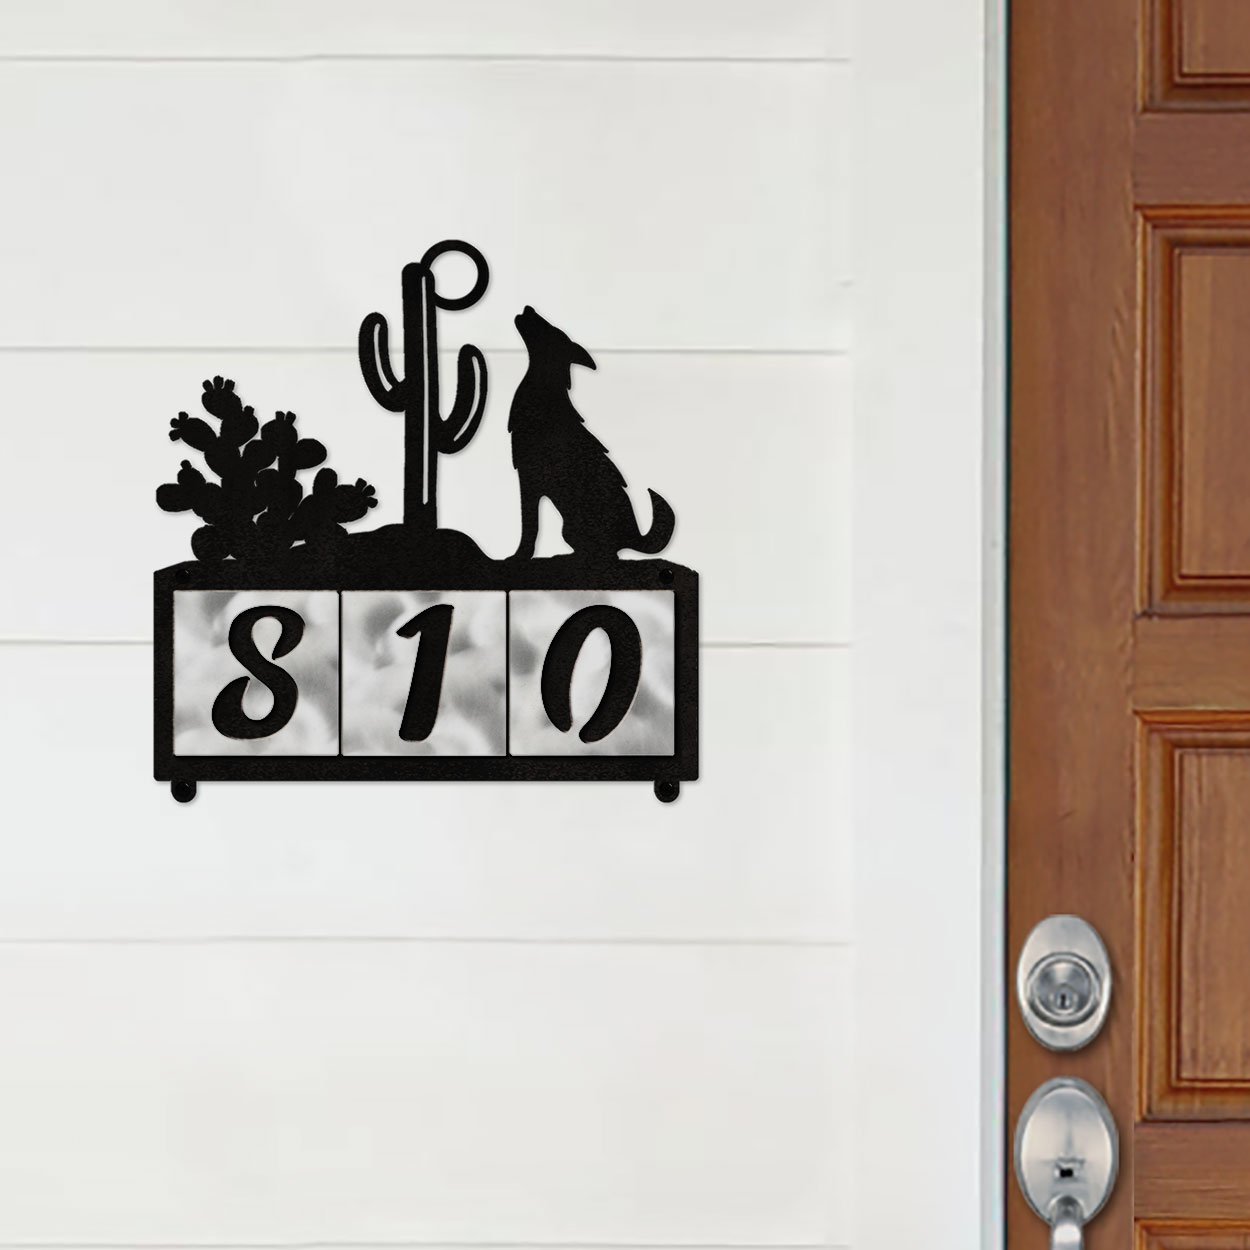 609083 - XL Howling Coyote Design 3-Digit Horizontal 6in Tile Outdoor House Numbers